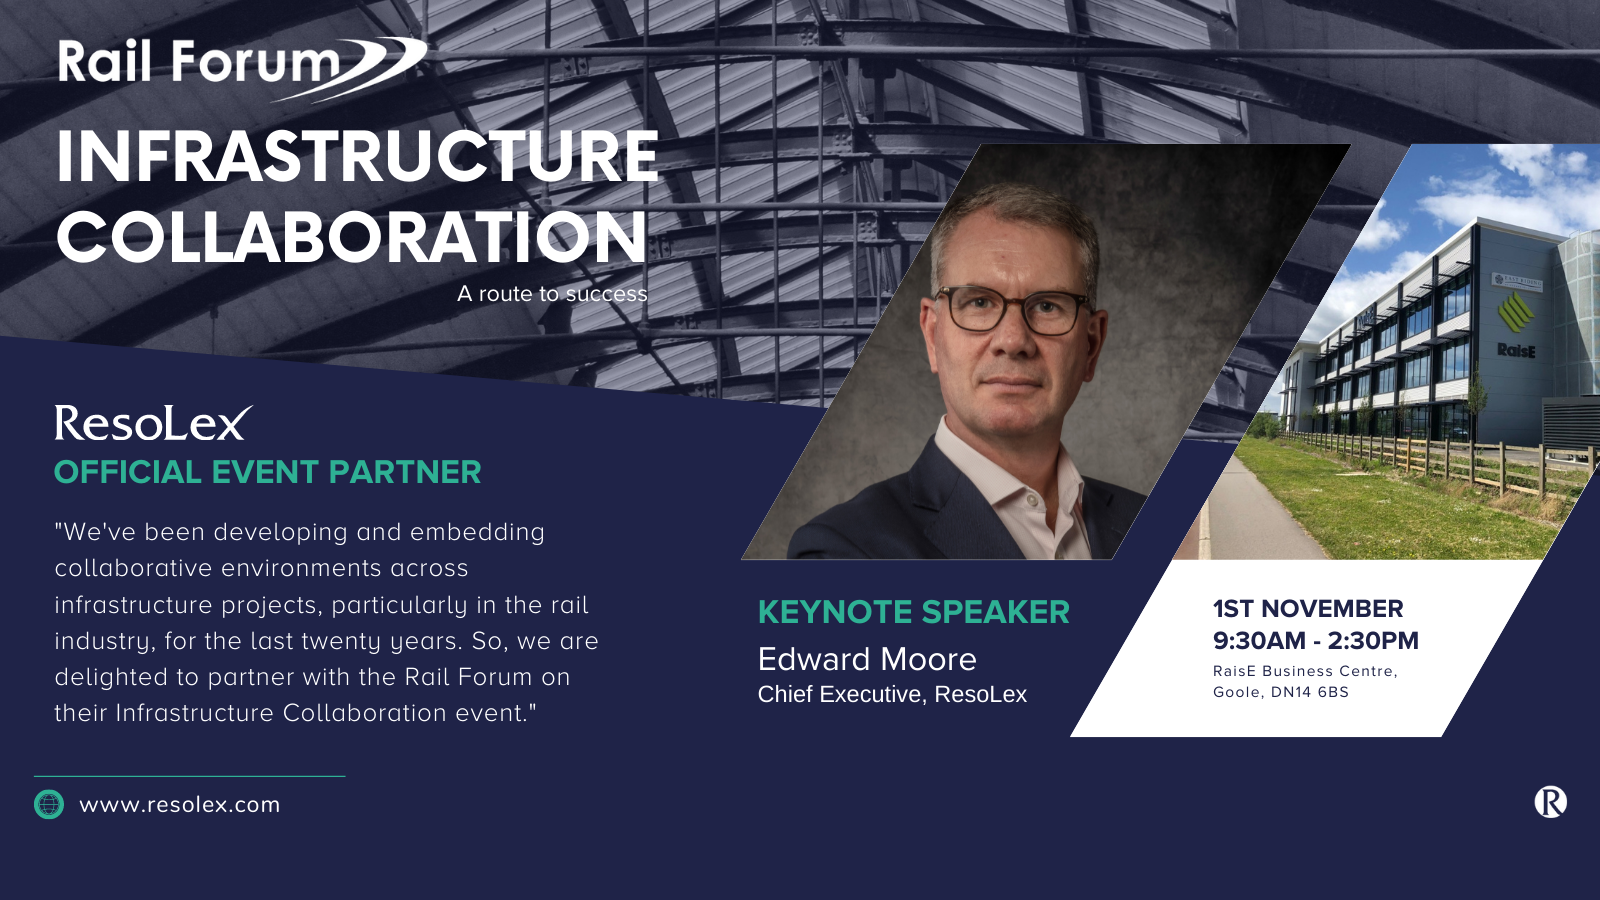 The Rail Forum's Infrastructure Collaboration event